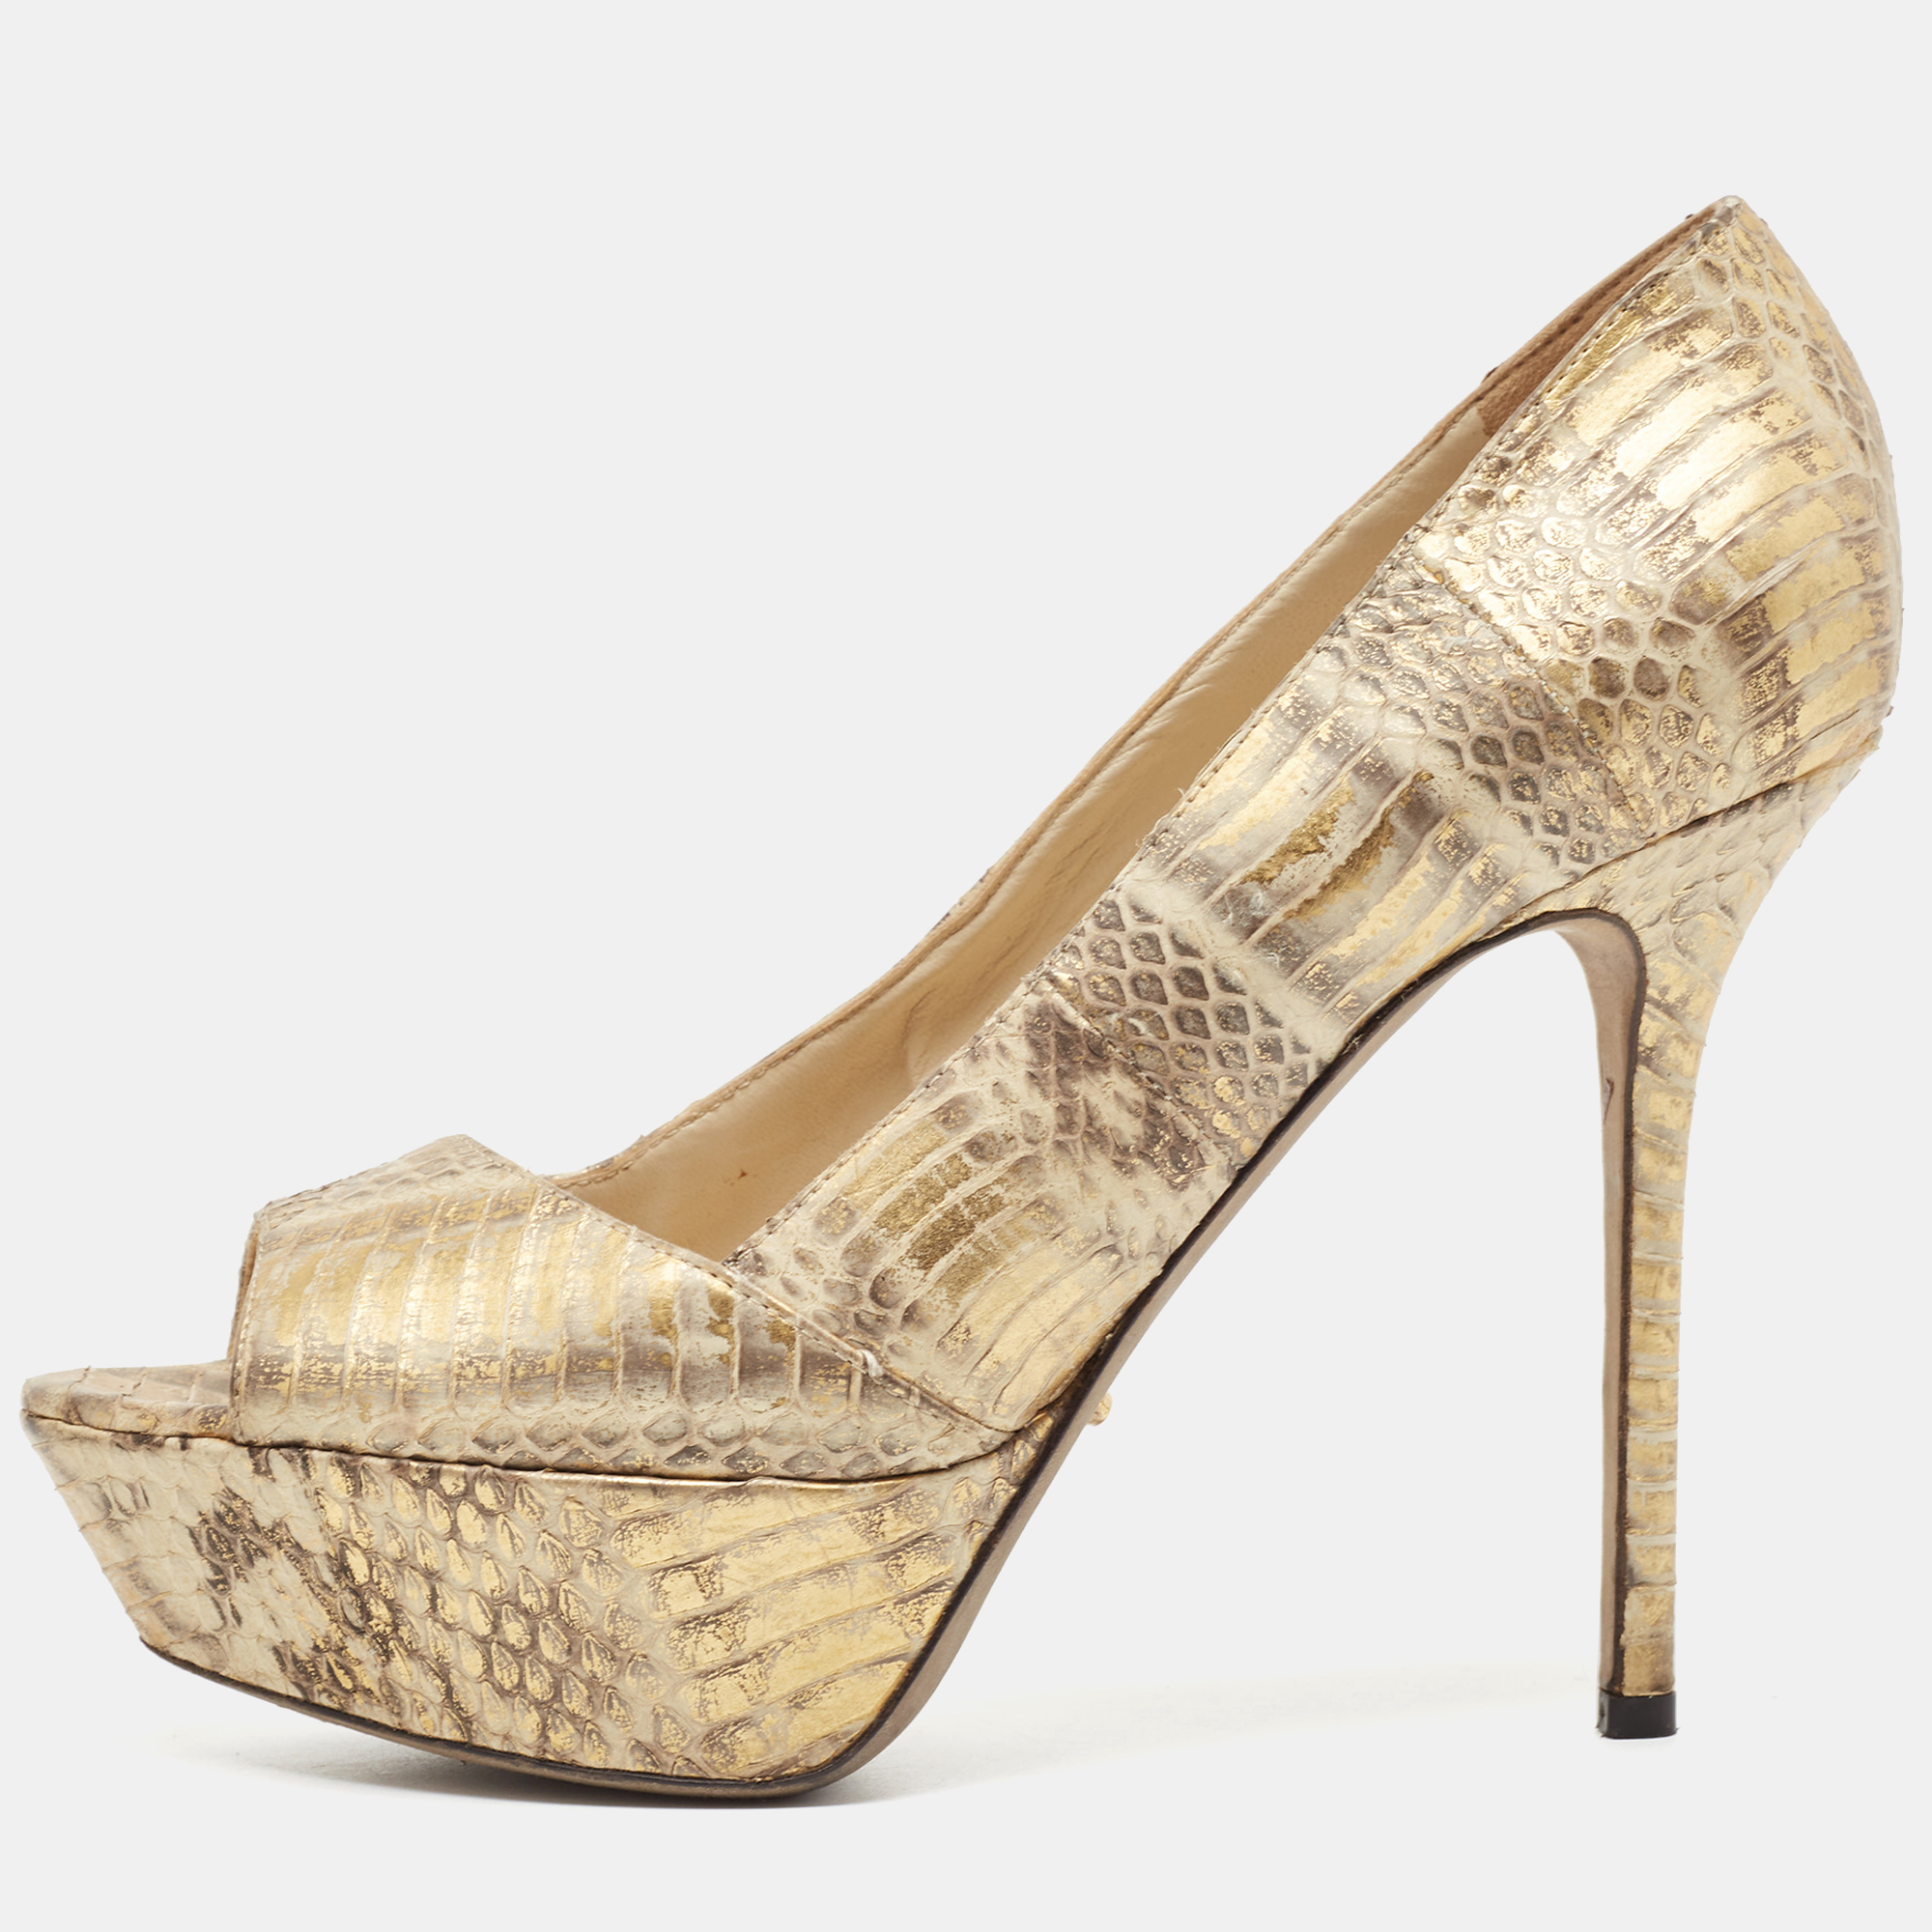 Pre-owned Sergio Rossi Beige/gold Python Embossed Leather Peep Toe Pumps Size 38.5